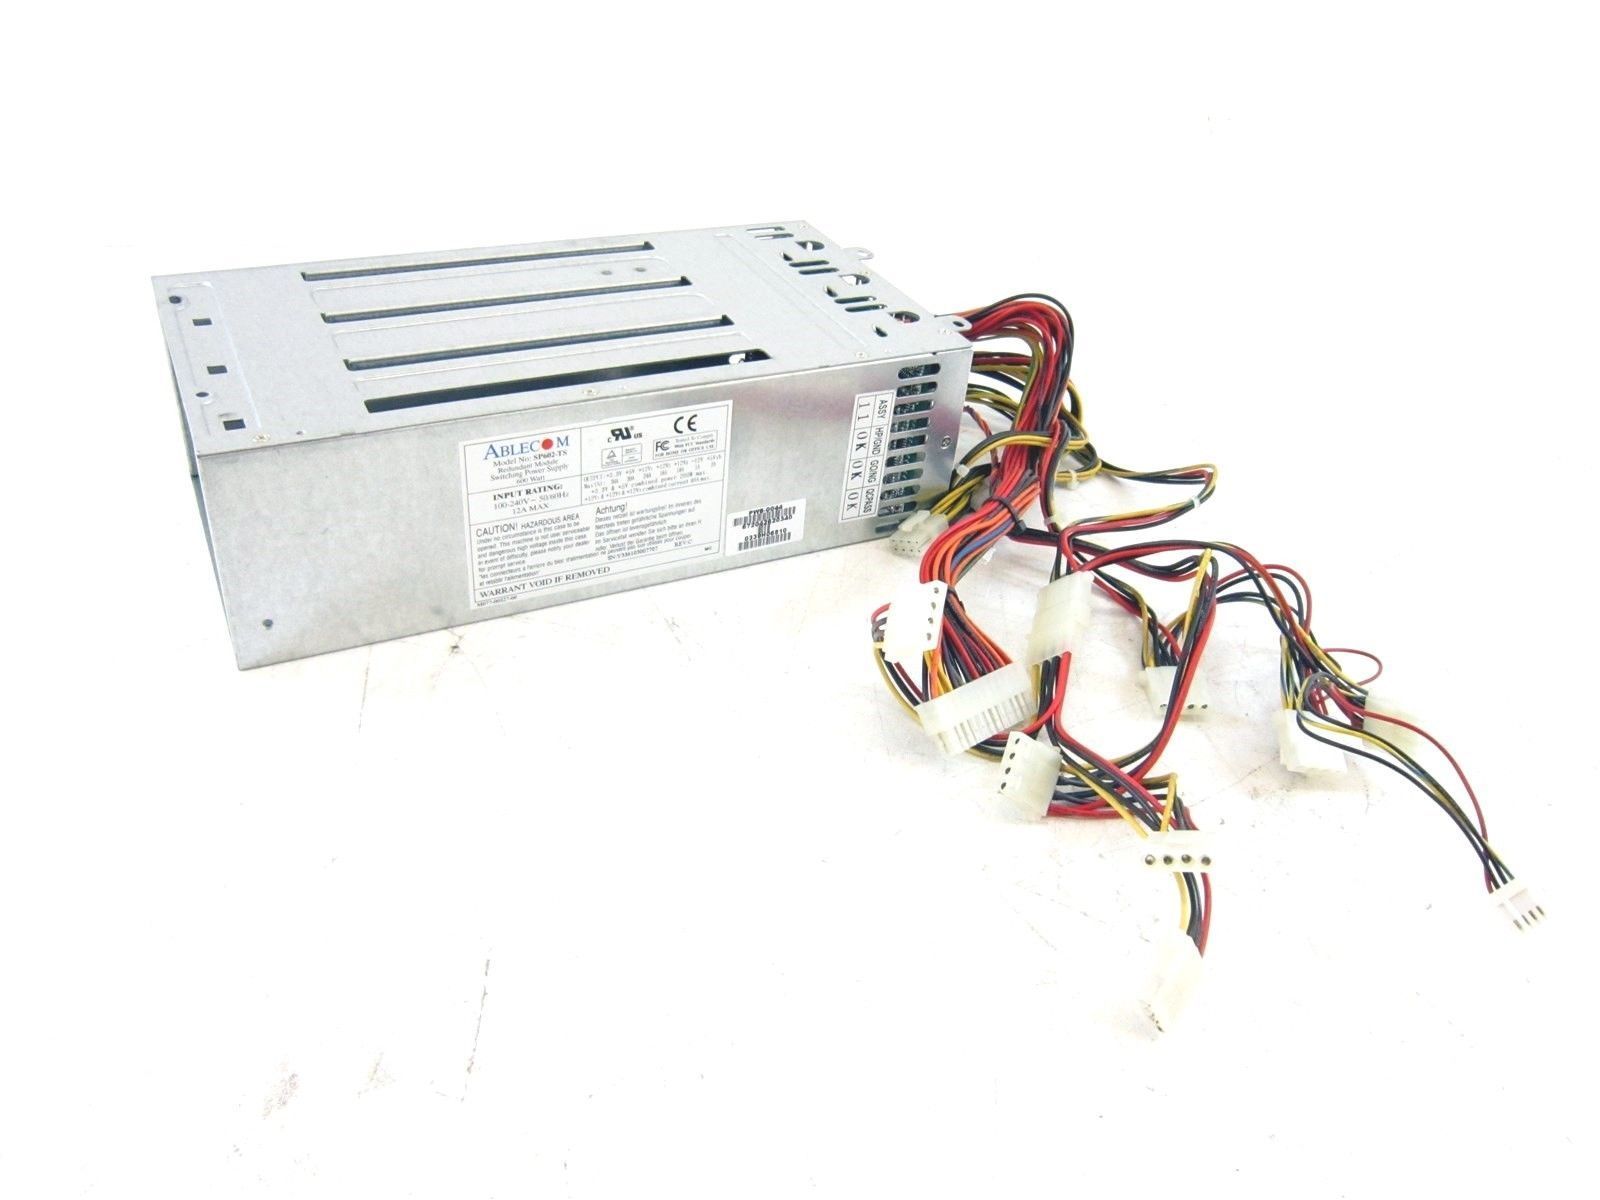 Supermicro 600W Triple Redundant Power Supply (SP602-TS) For SC742 Chassis - PWS-0044